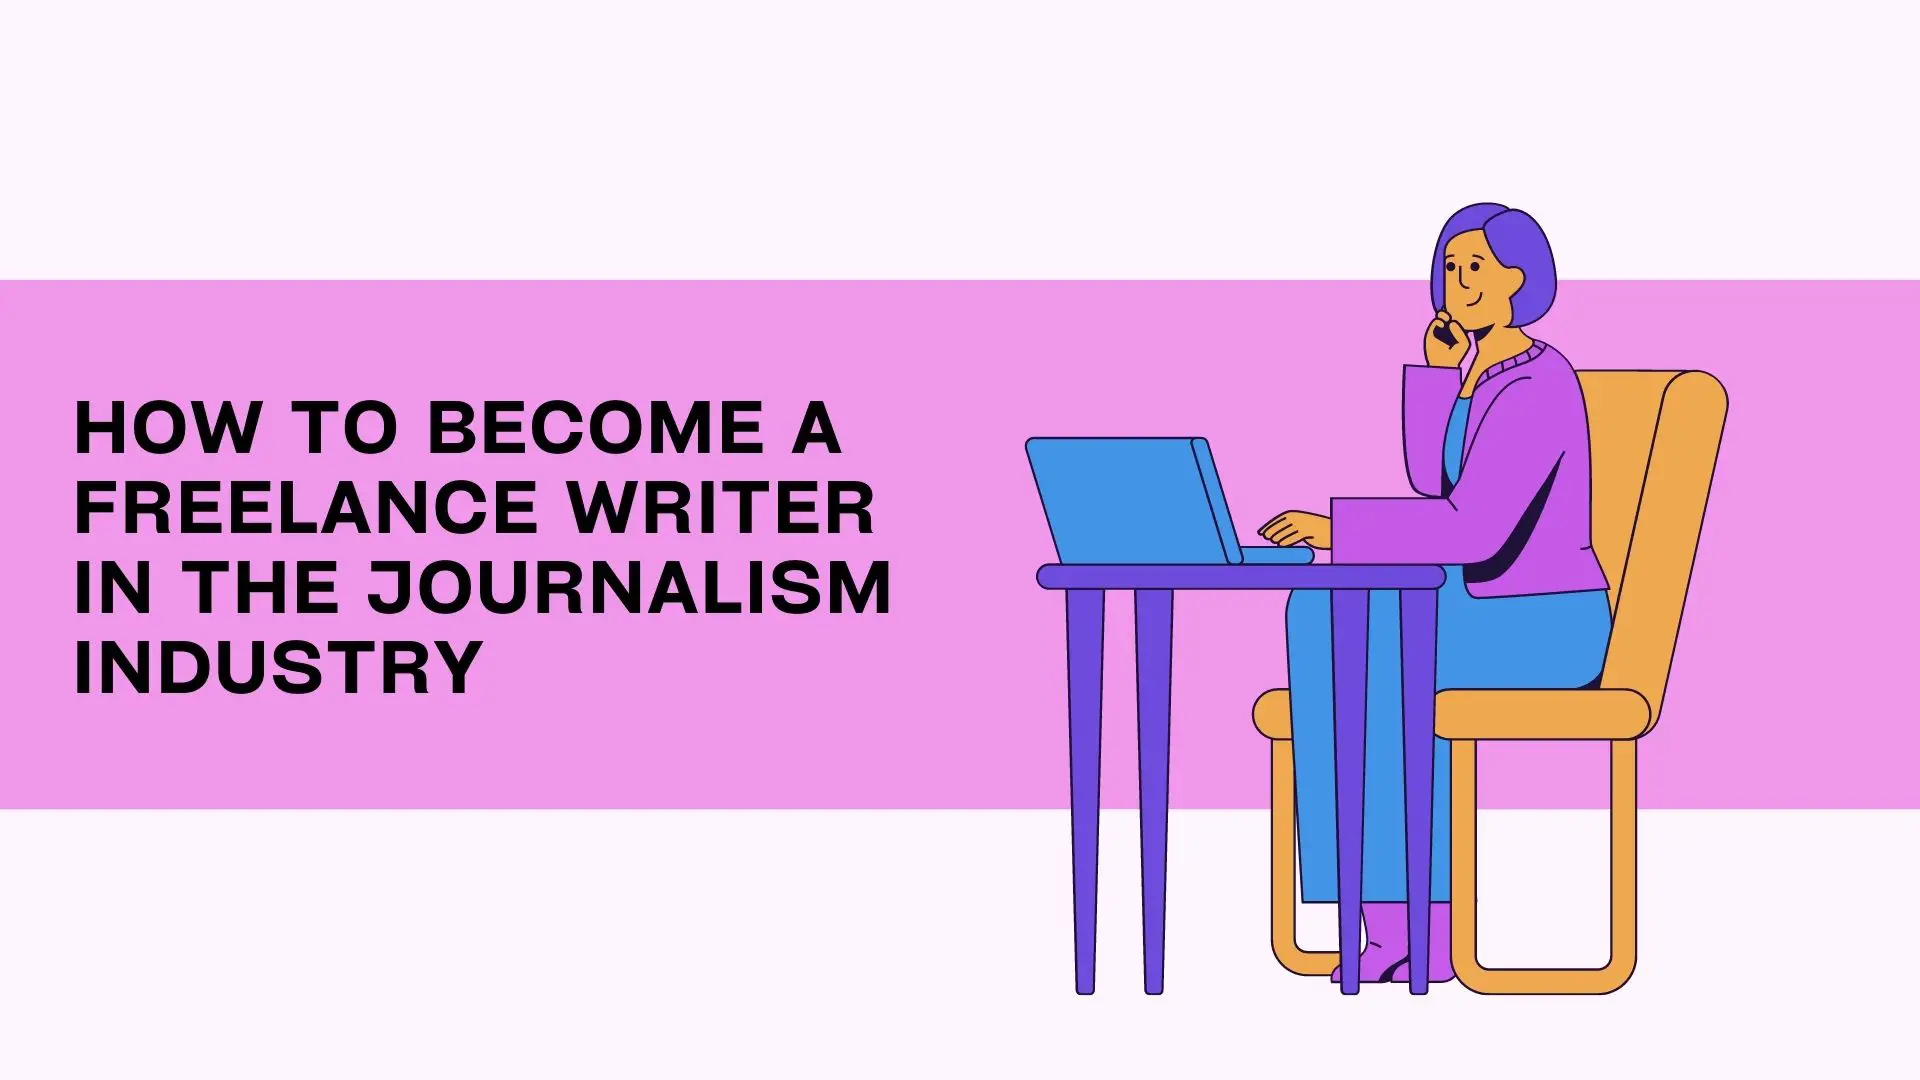 How To Become A Freelance Writer In The Journalism Industry